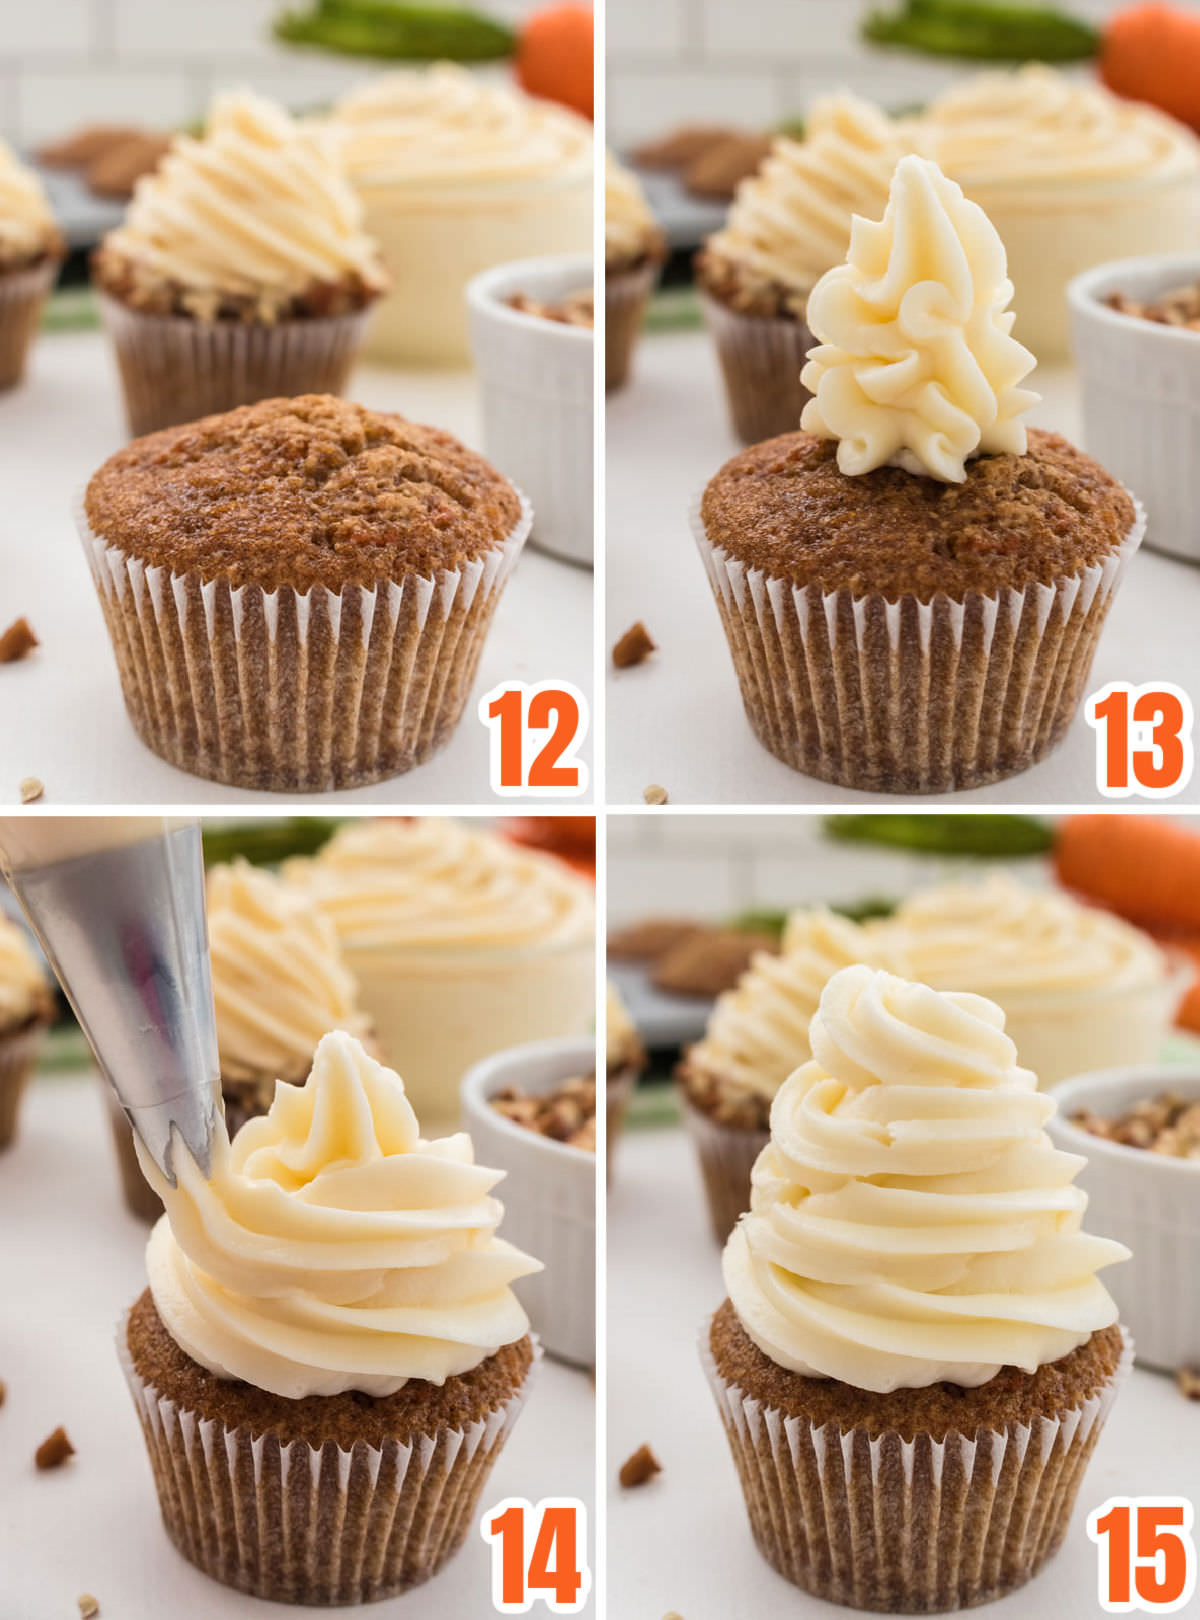 Collage image showing how to frost the carrot cake cupcake with a swirl of homemade Cream Cheese Frosting.